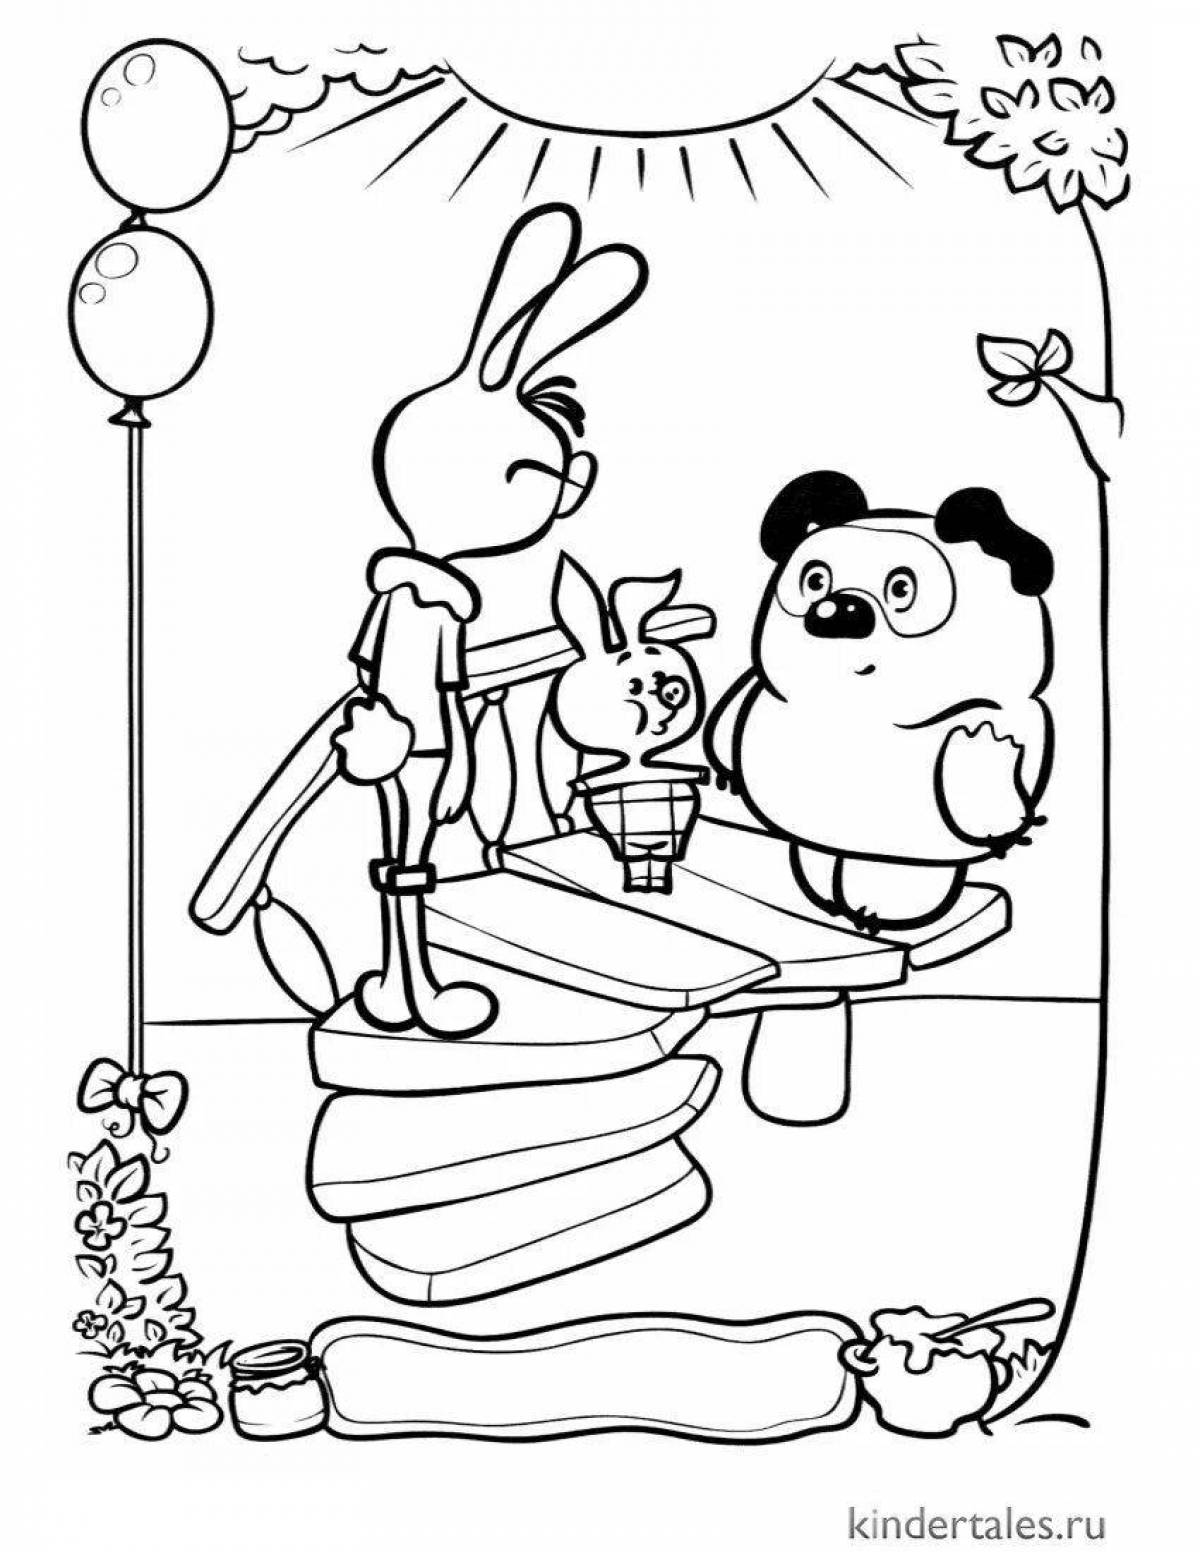 Fun coloring Winnie the Pooh and Piglet